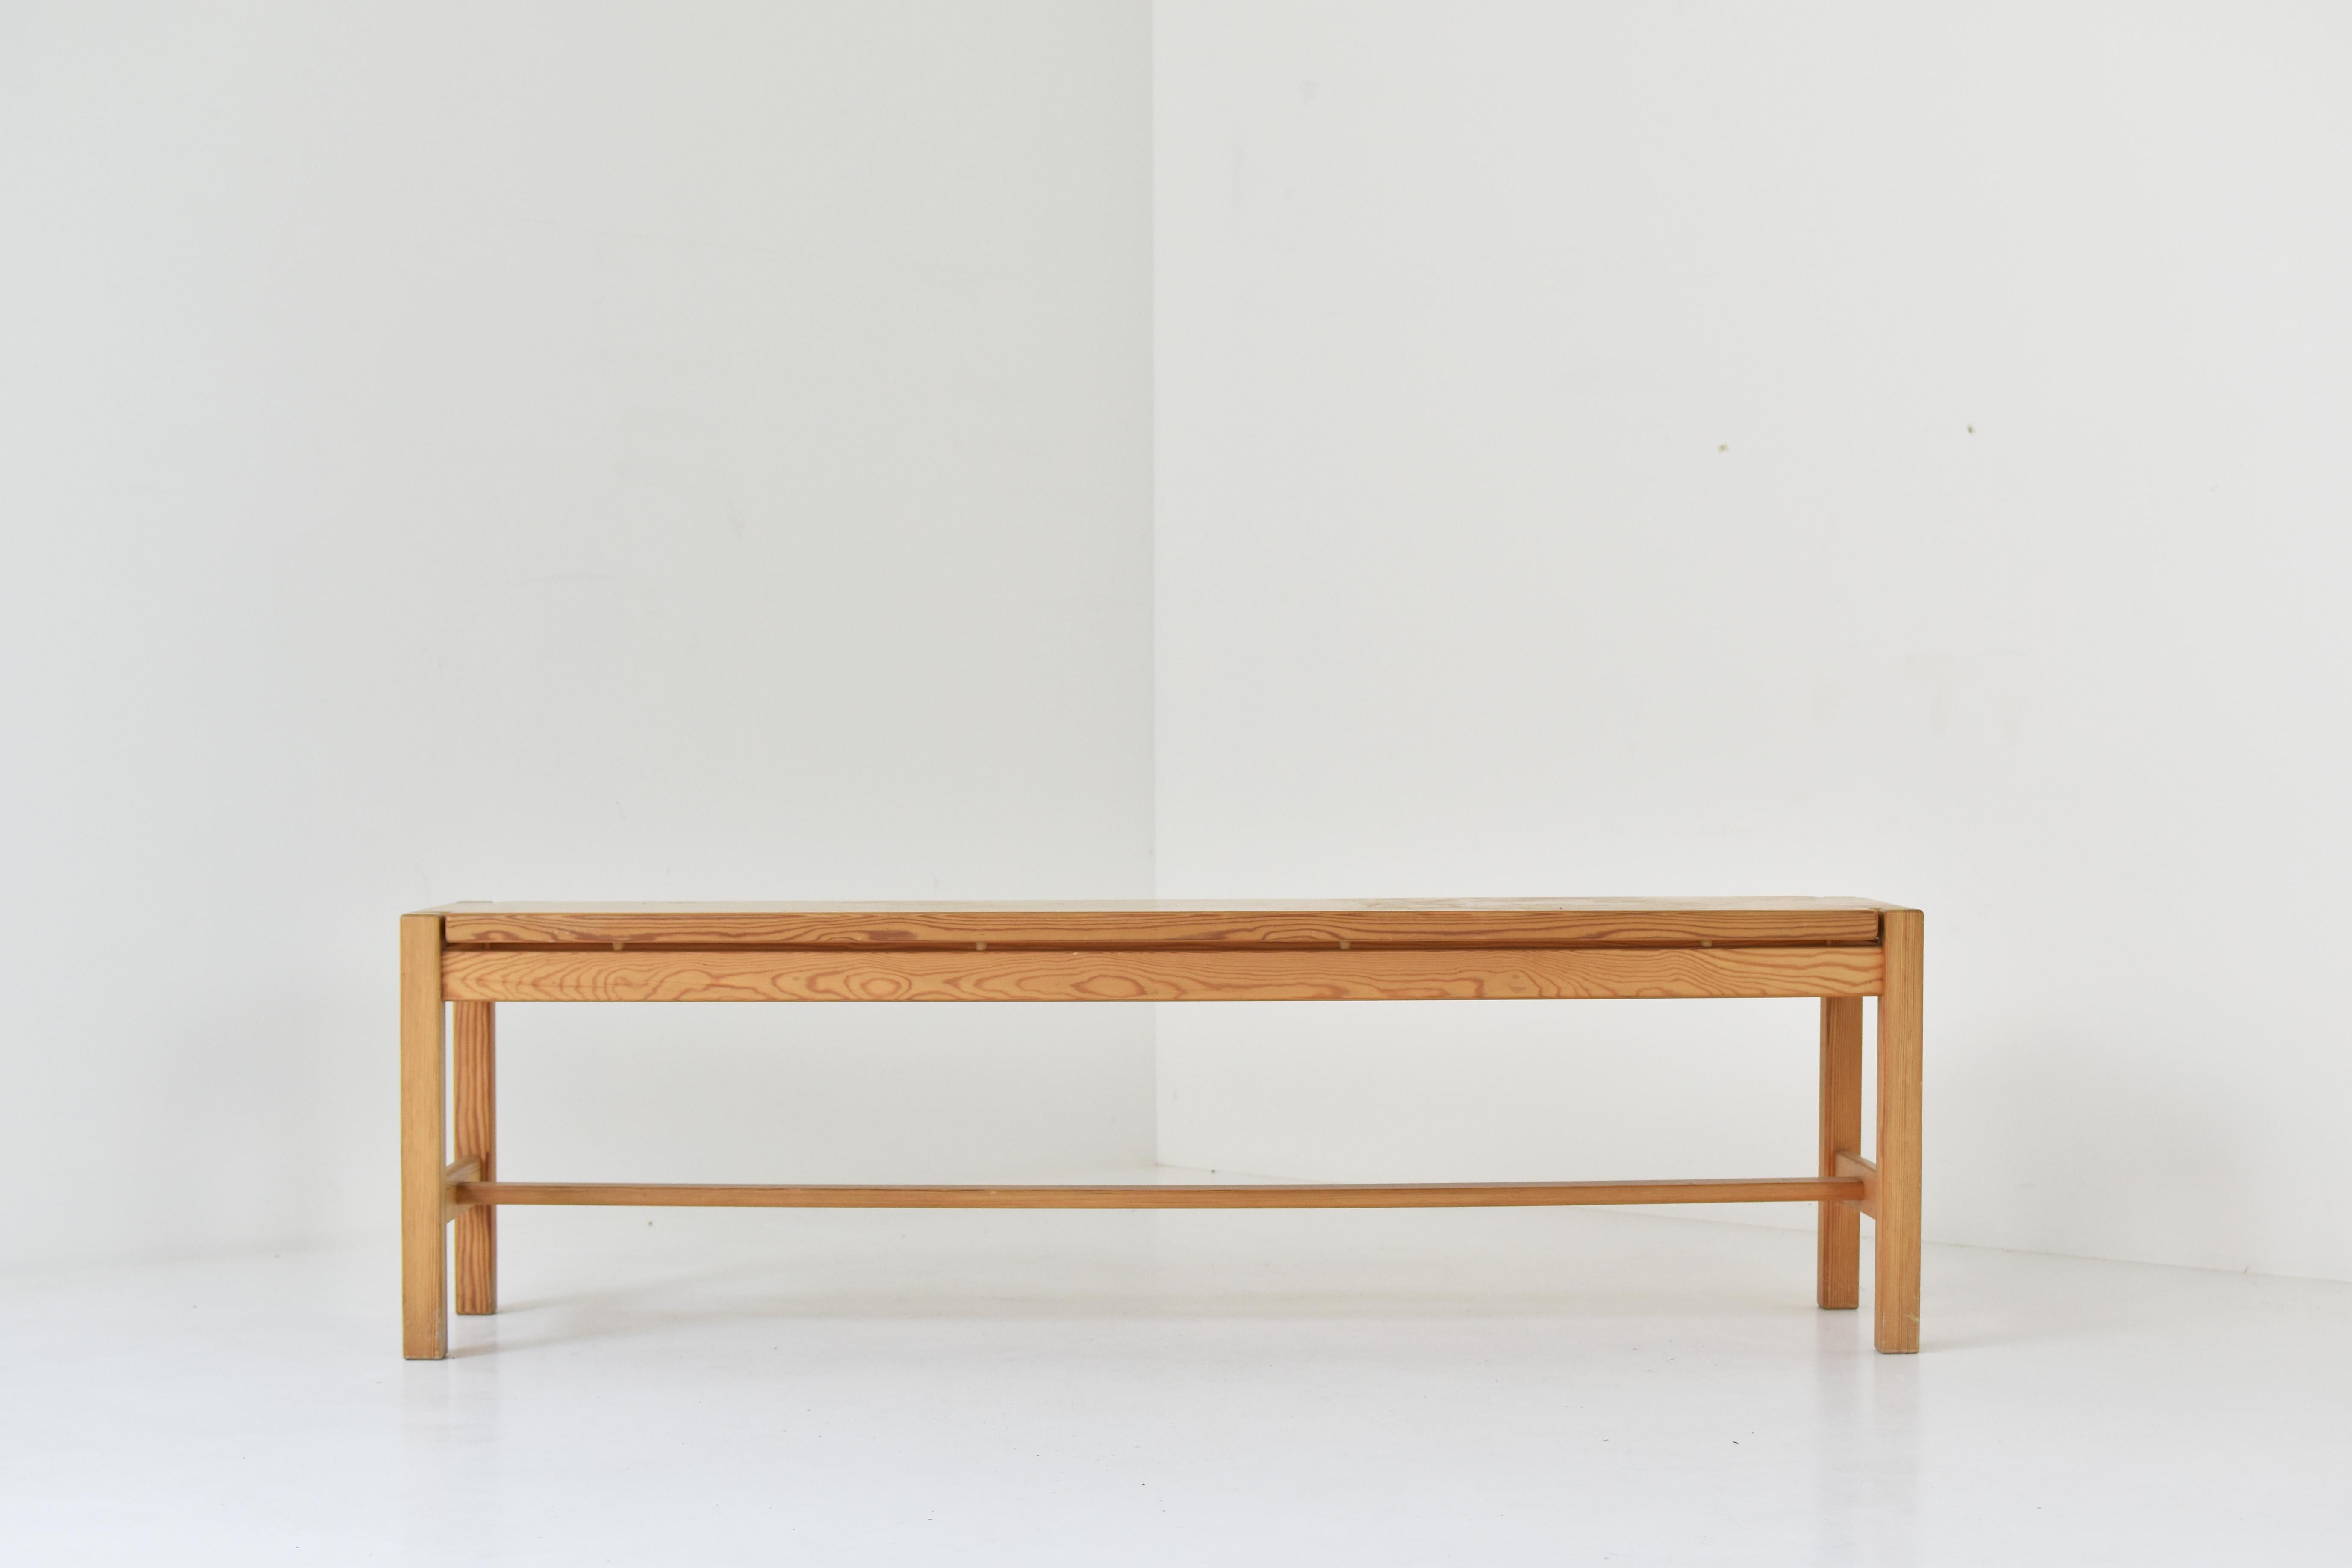 Bench by Ilmari Tapiovaara for Laukaan Puu, Finland 1963. This bench or side table is made out of solid pine and has a very nice warm patina. Elegant and simplistic design. In good condition with some light age related usermarks.